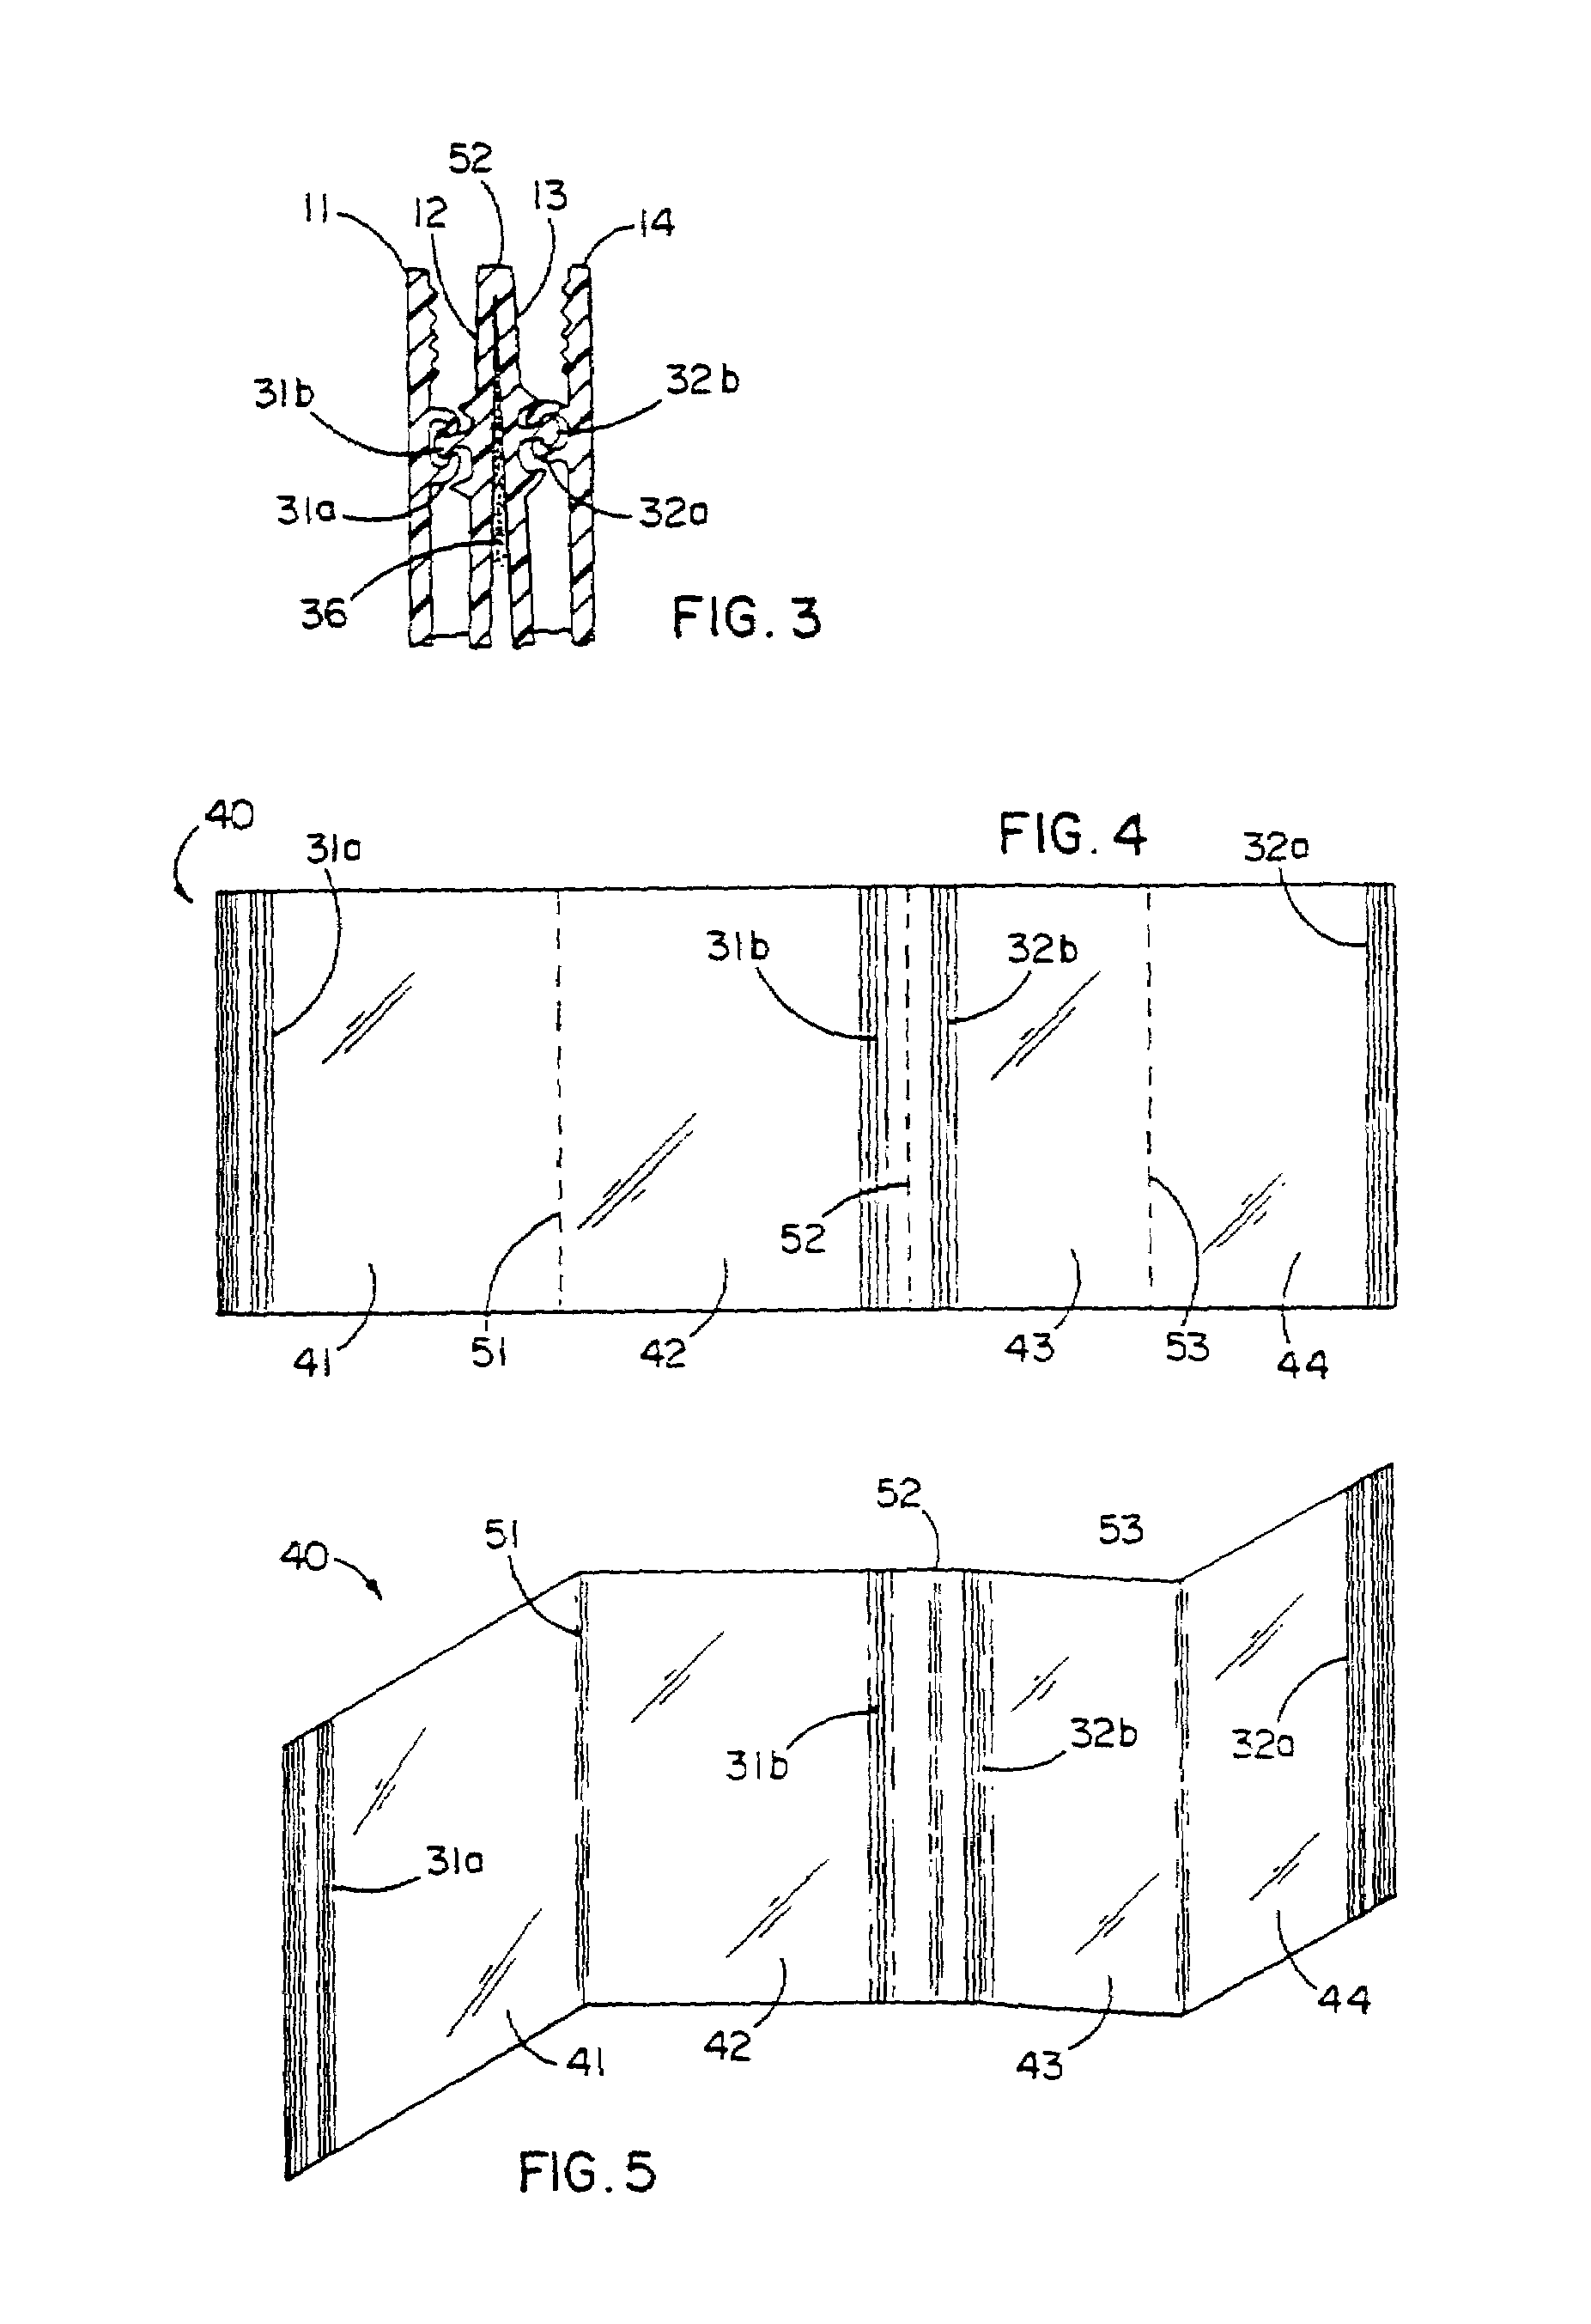 Method for making a multicompartment thermoplastic bag